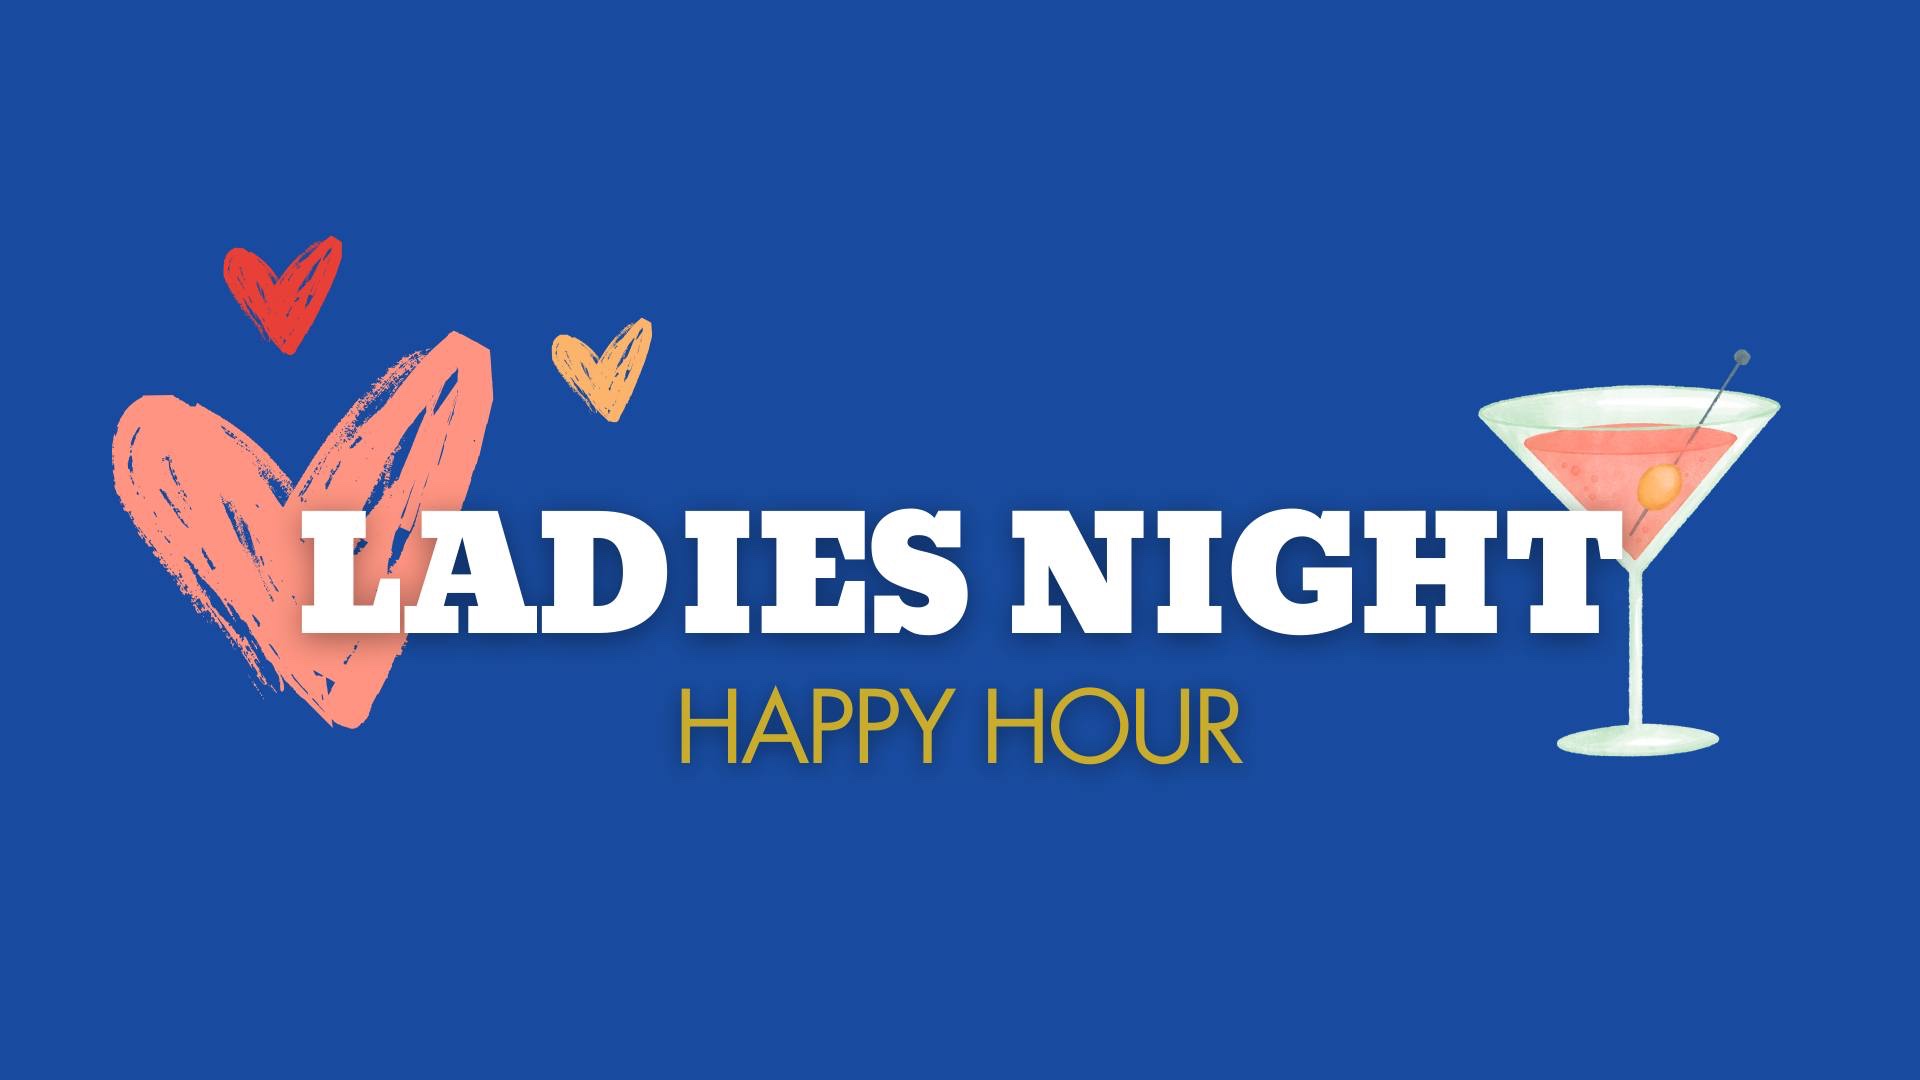 Ladies Night Happy Hour at The Skylight Bar Downtown Franklin